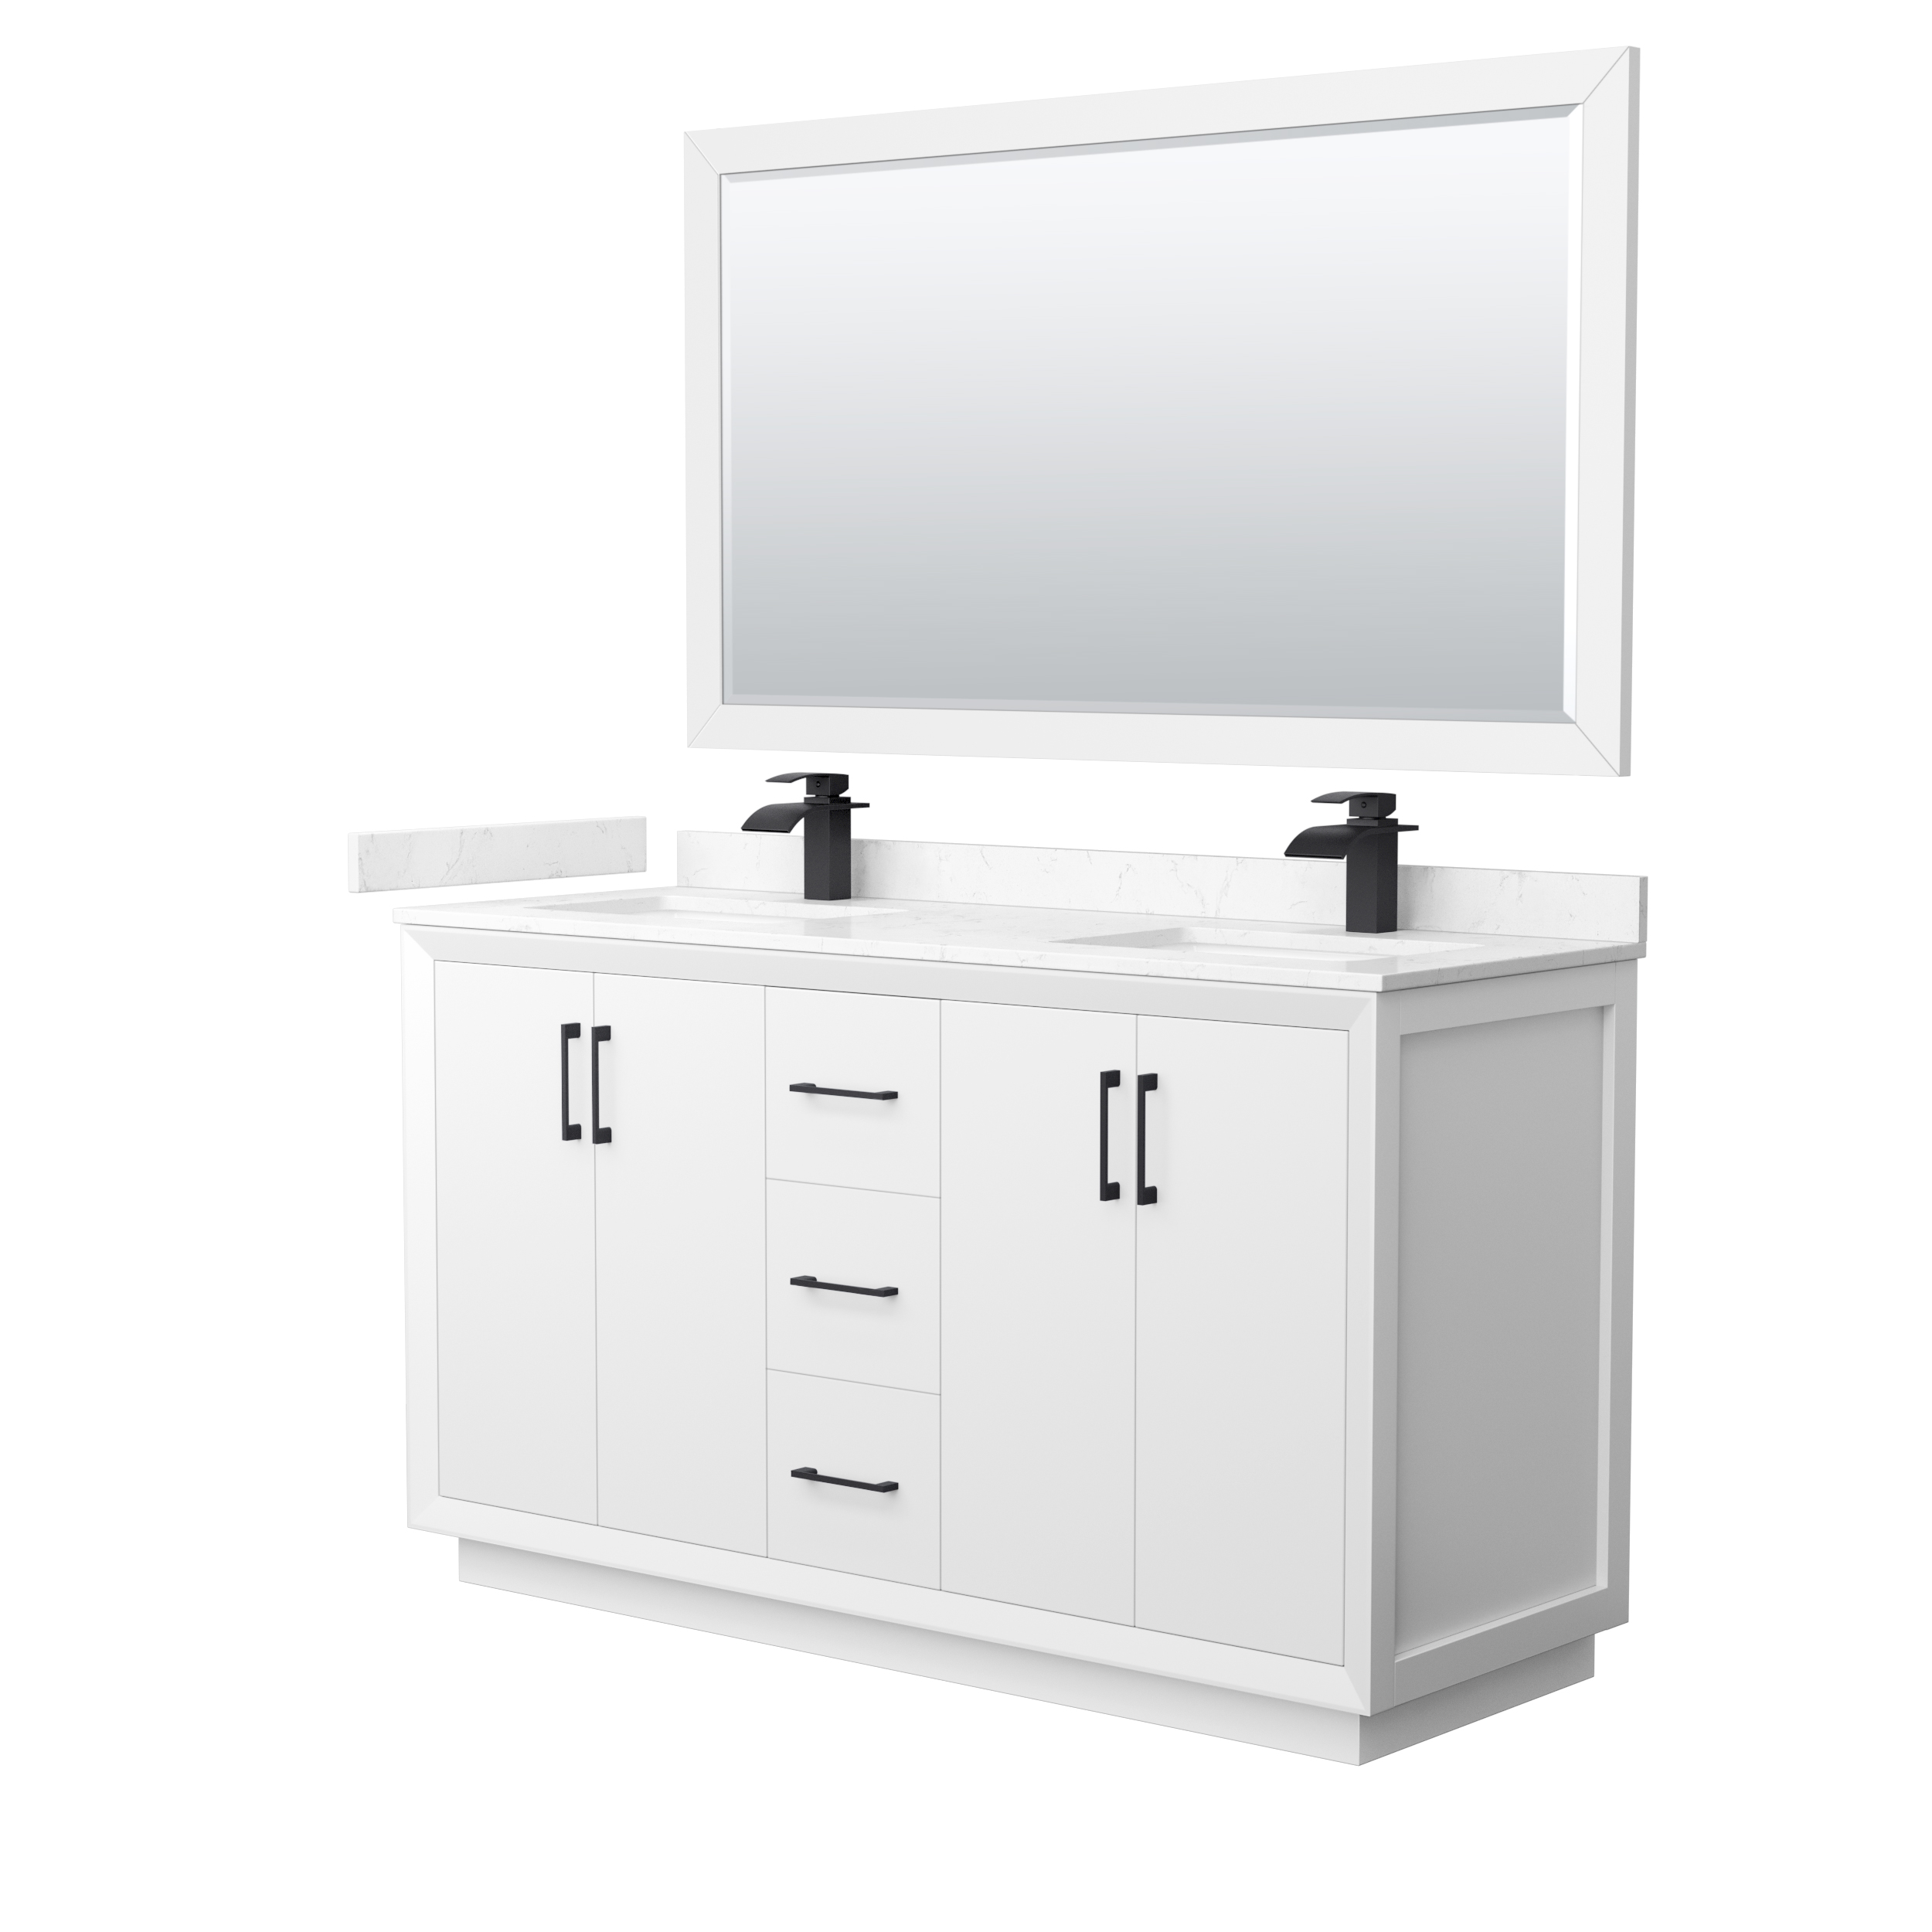 60" Transitional Double Vanity Base in White, 3 Top Option, with 3 Hardware Options and Mirror Option